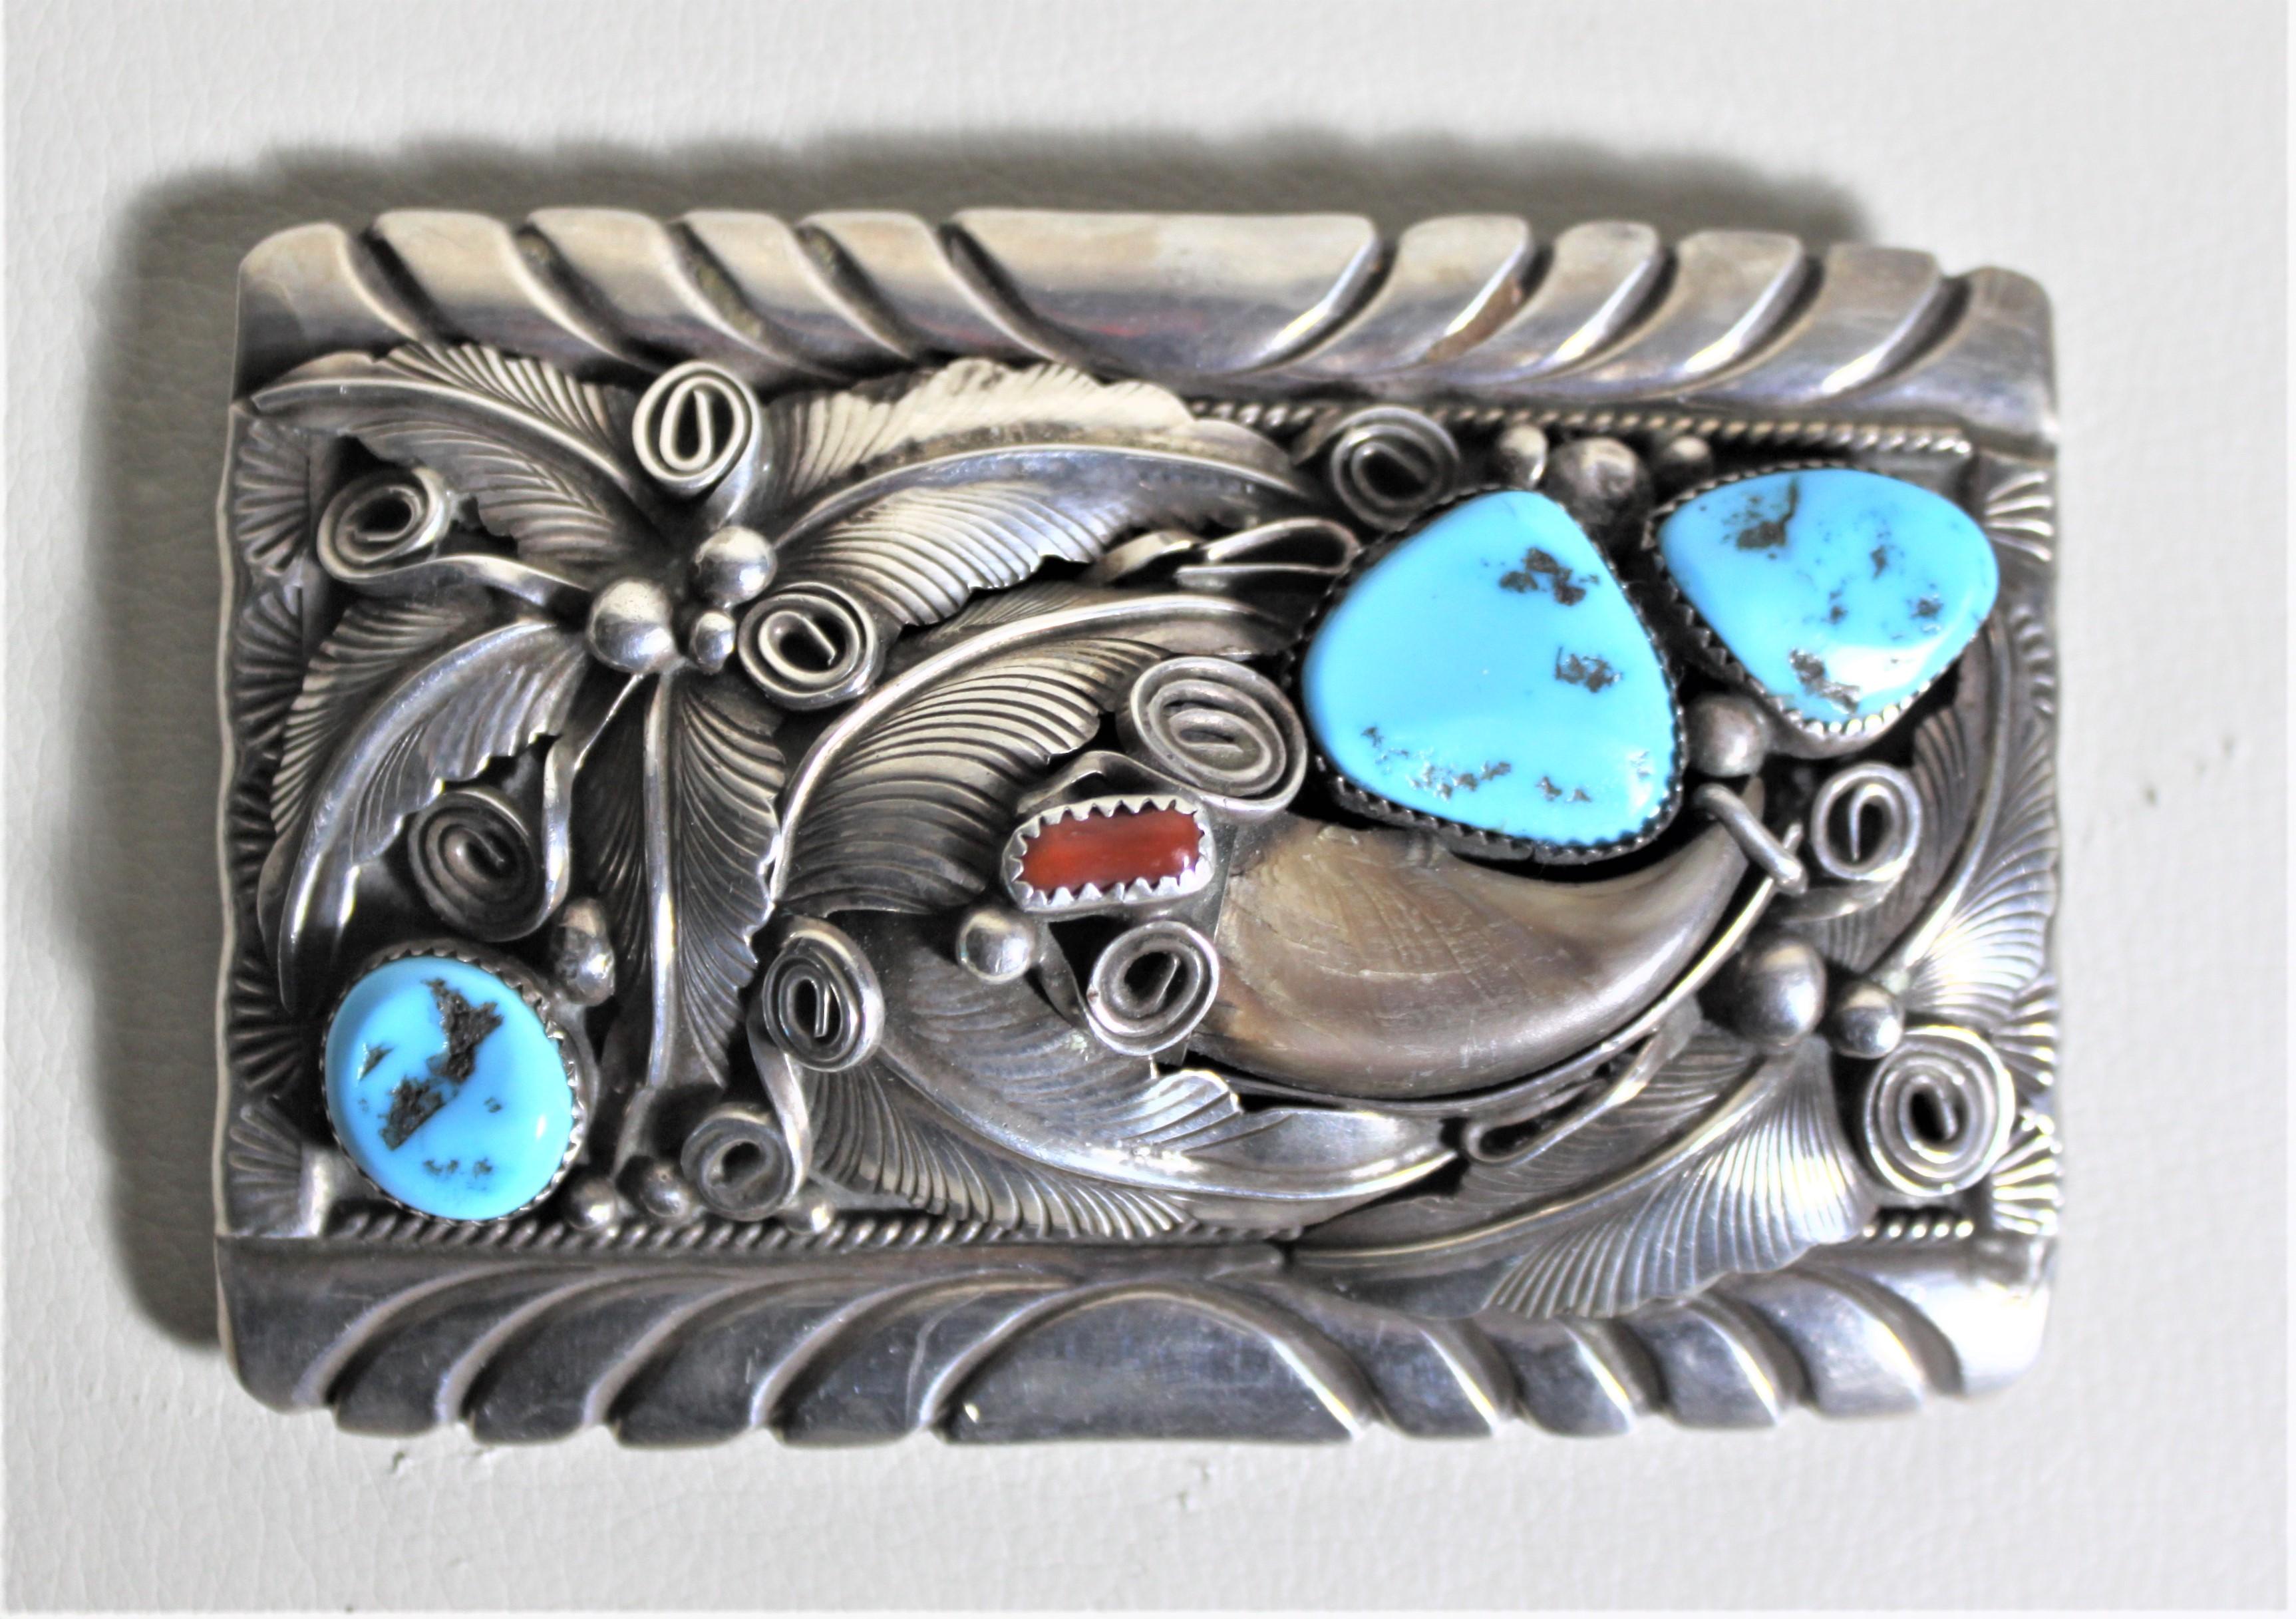 This sterling silver and turquoise belt buckle is signed M. Thomas Jr., a known Indigenous American silversmith and done in his signature Navajo style. This large and substantial buckle is intricately hand-crafted with sterling silver with inlaid